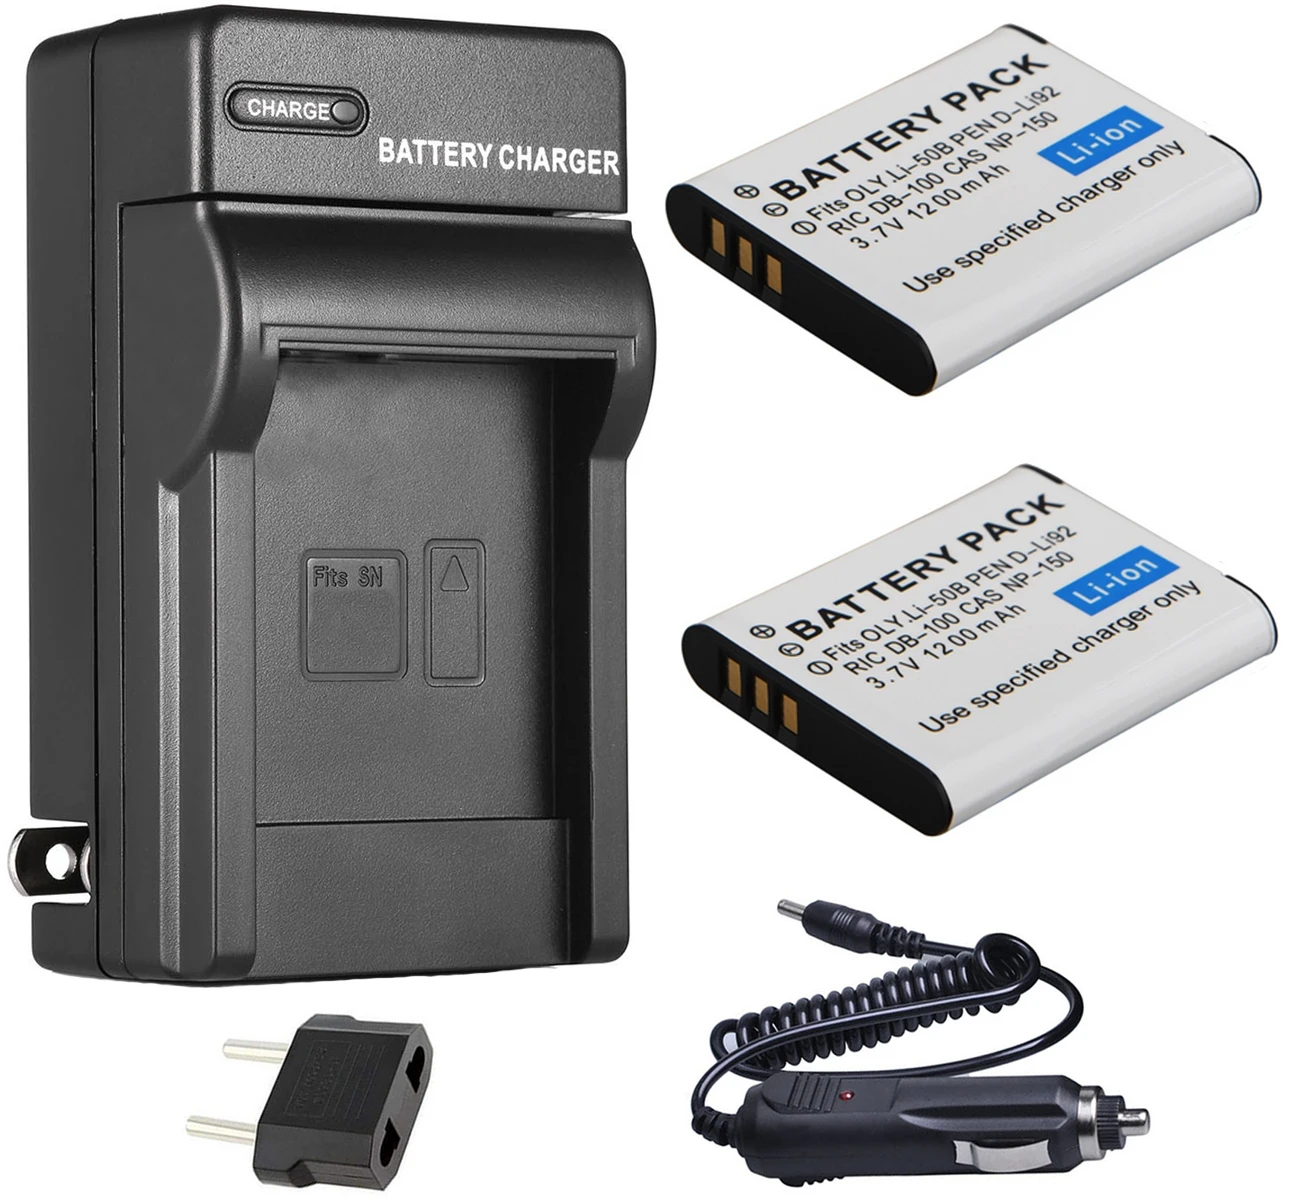 2 Battery and USB Travel Charger for Olympus Stylus Tough TG-850 Tough TG-870 Digital Camera Tough TG-860